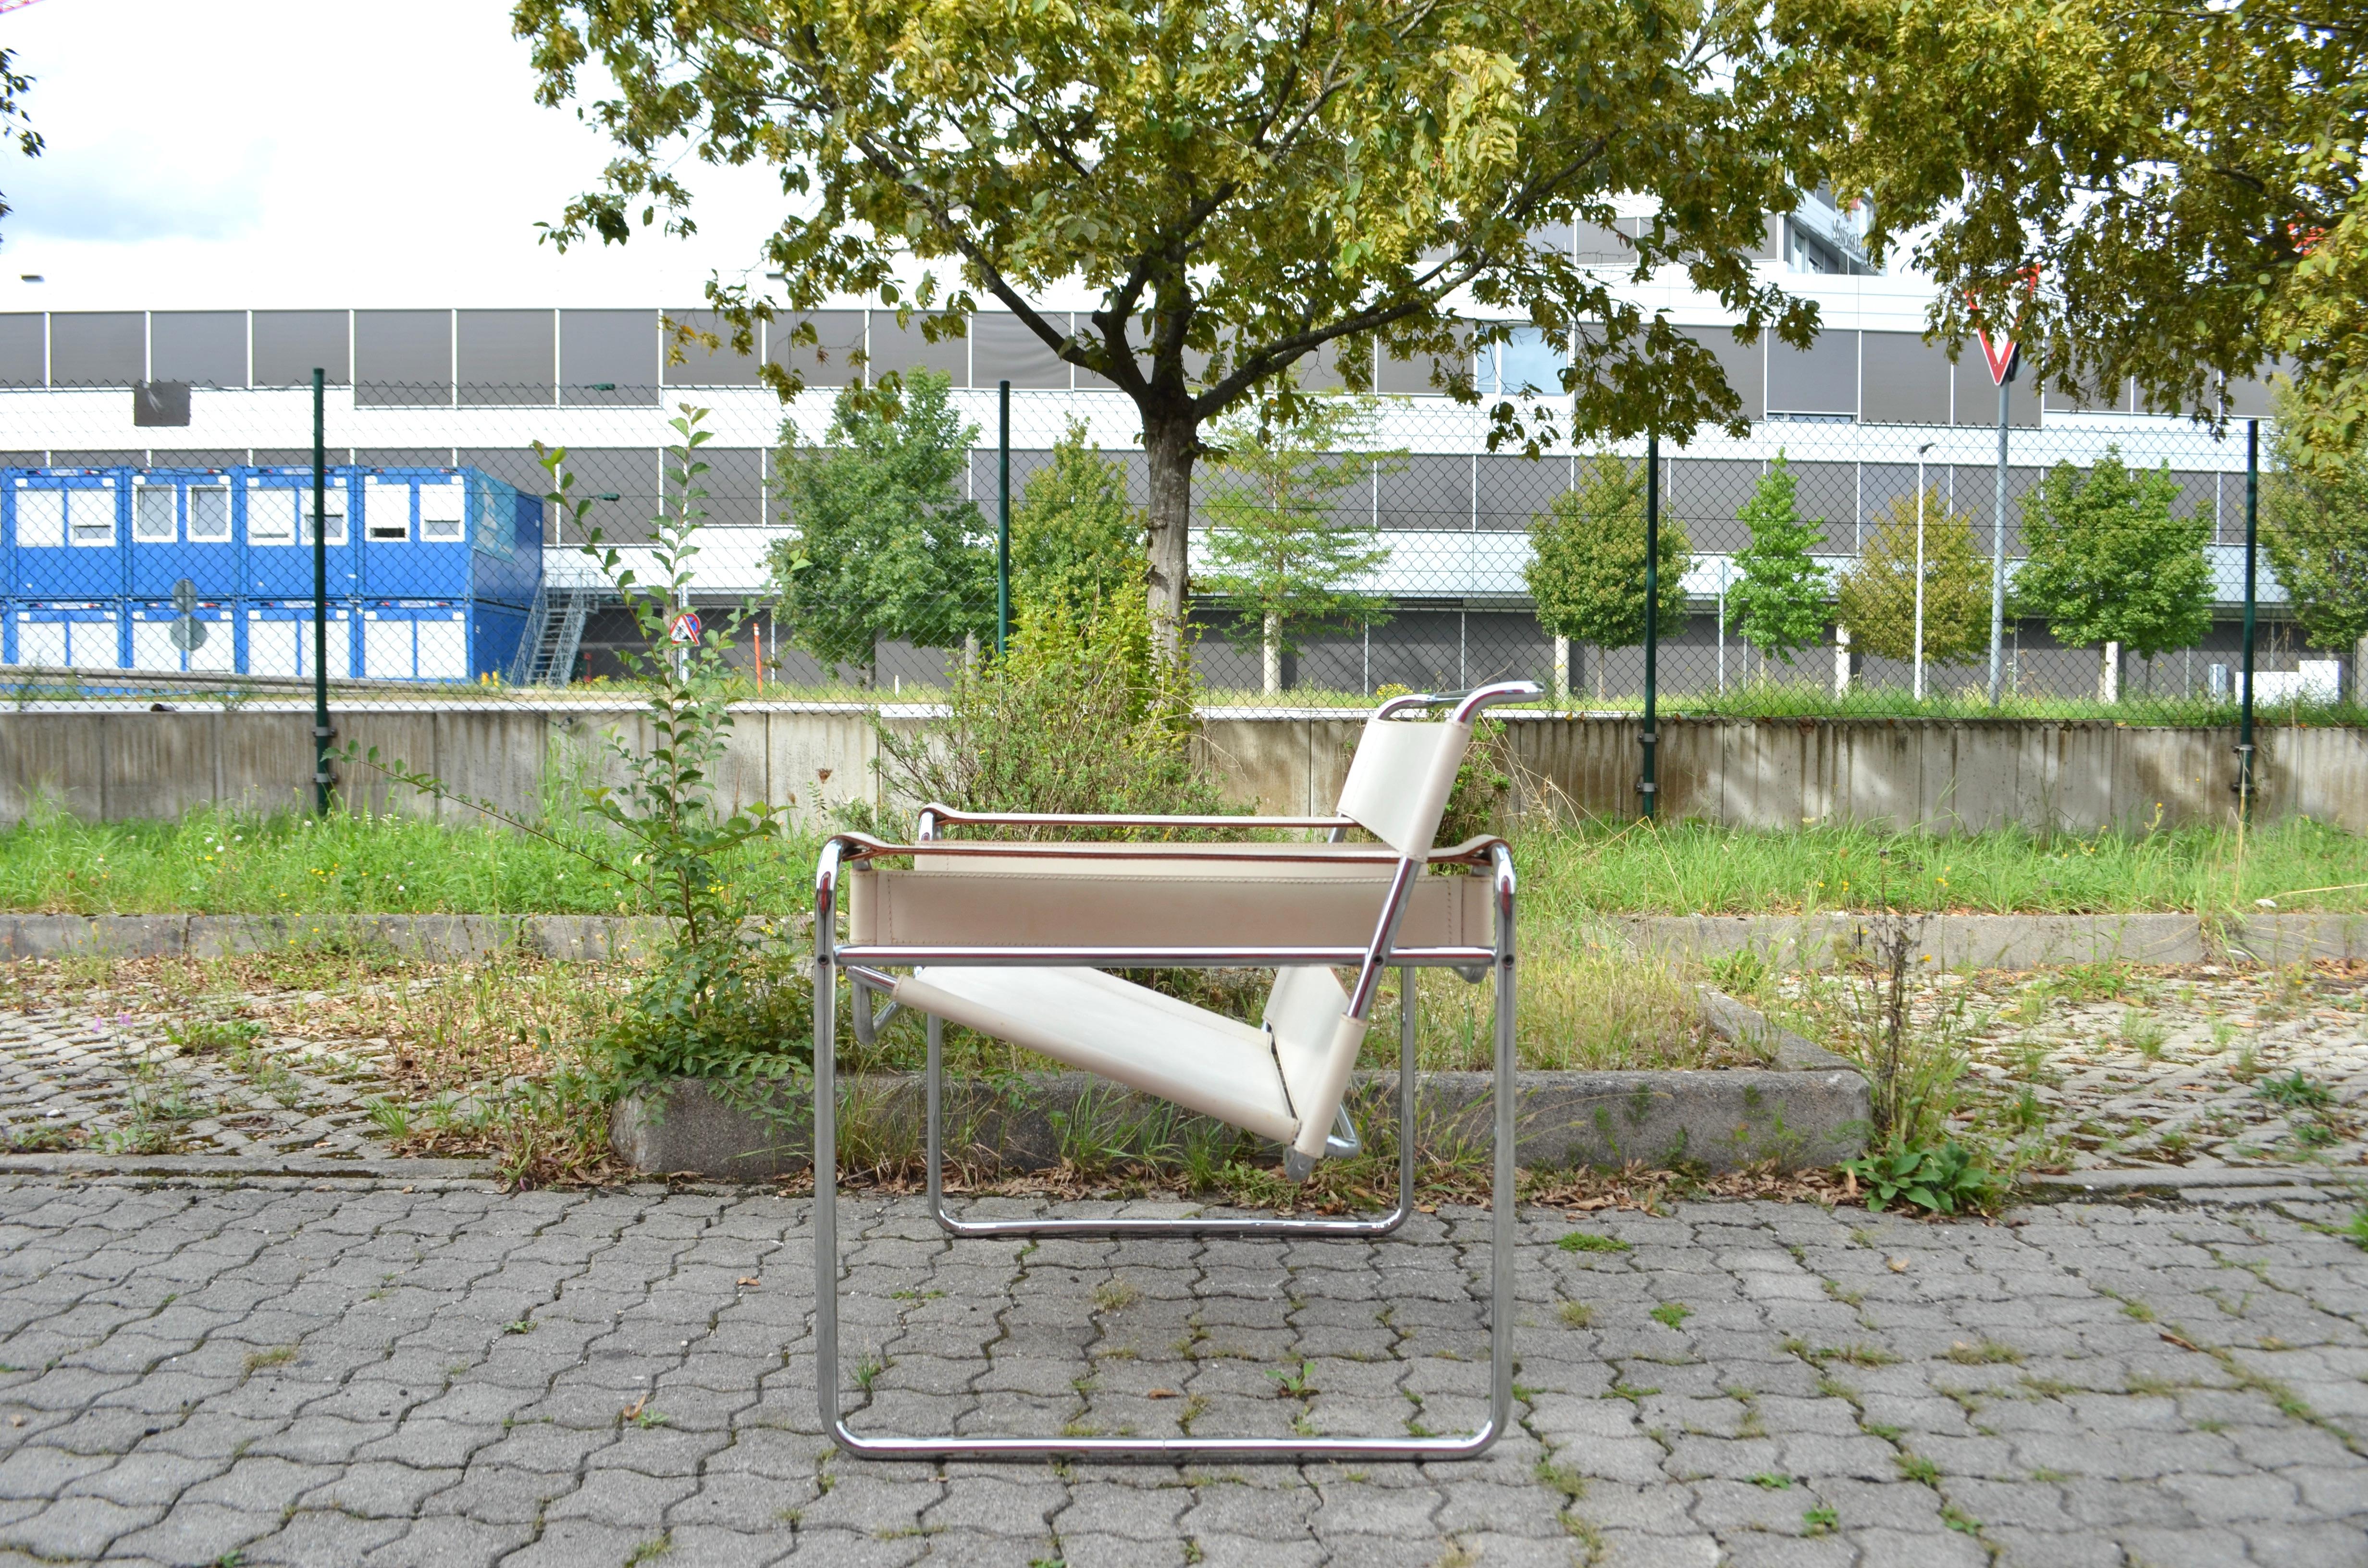 Bauhaus Gavina Wassily Chair B3 Vintage Leather White by Marcel Breuer 1 of 2 For Sale